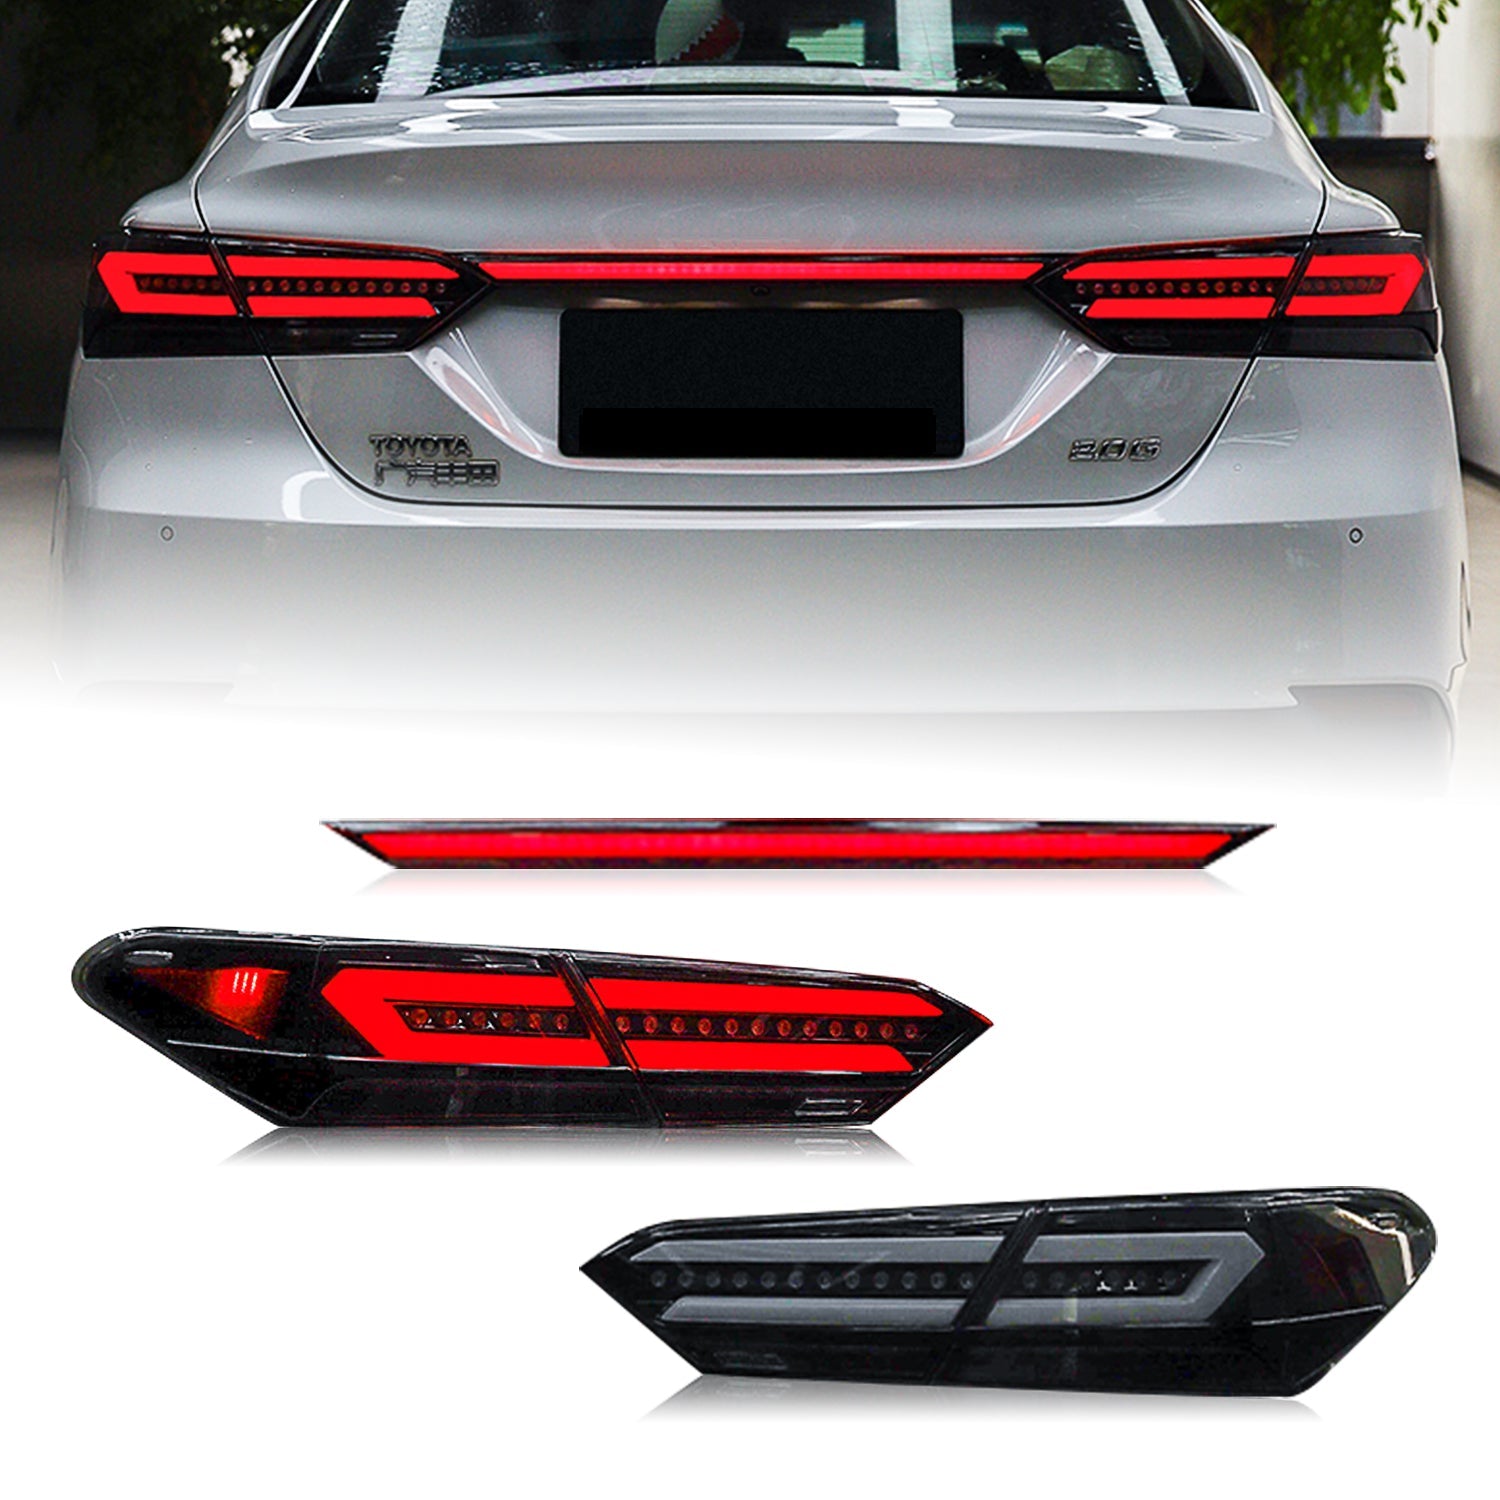 HCMOTION Taillights Fit/For Toyota Camry 2018-2022 - HCMOTION